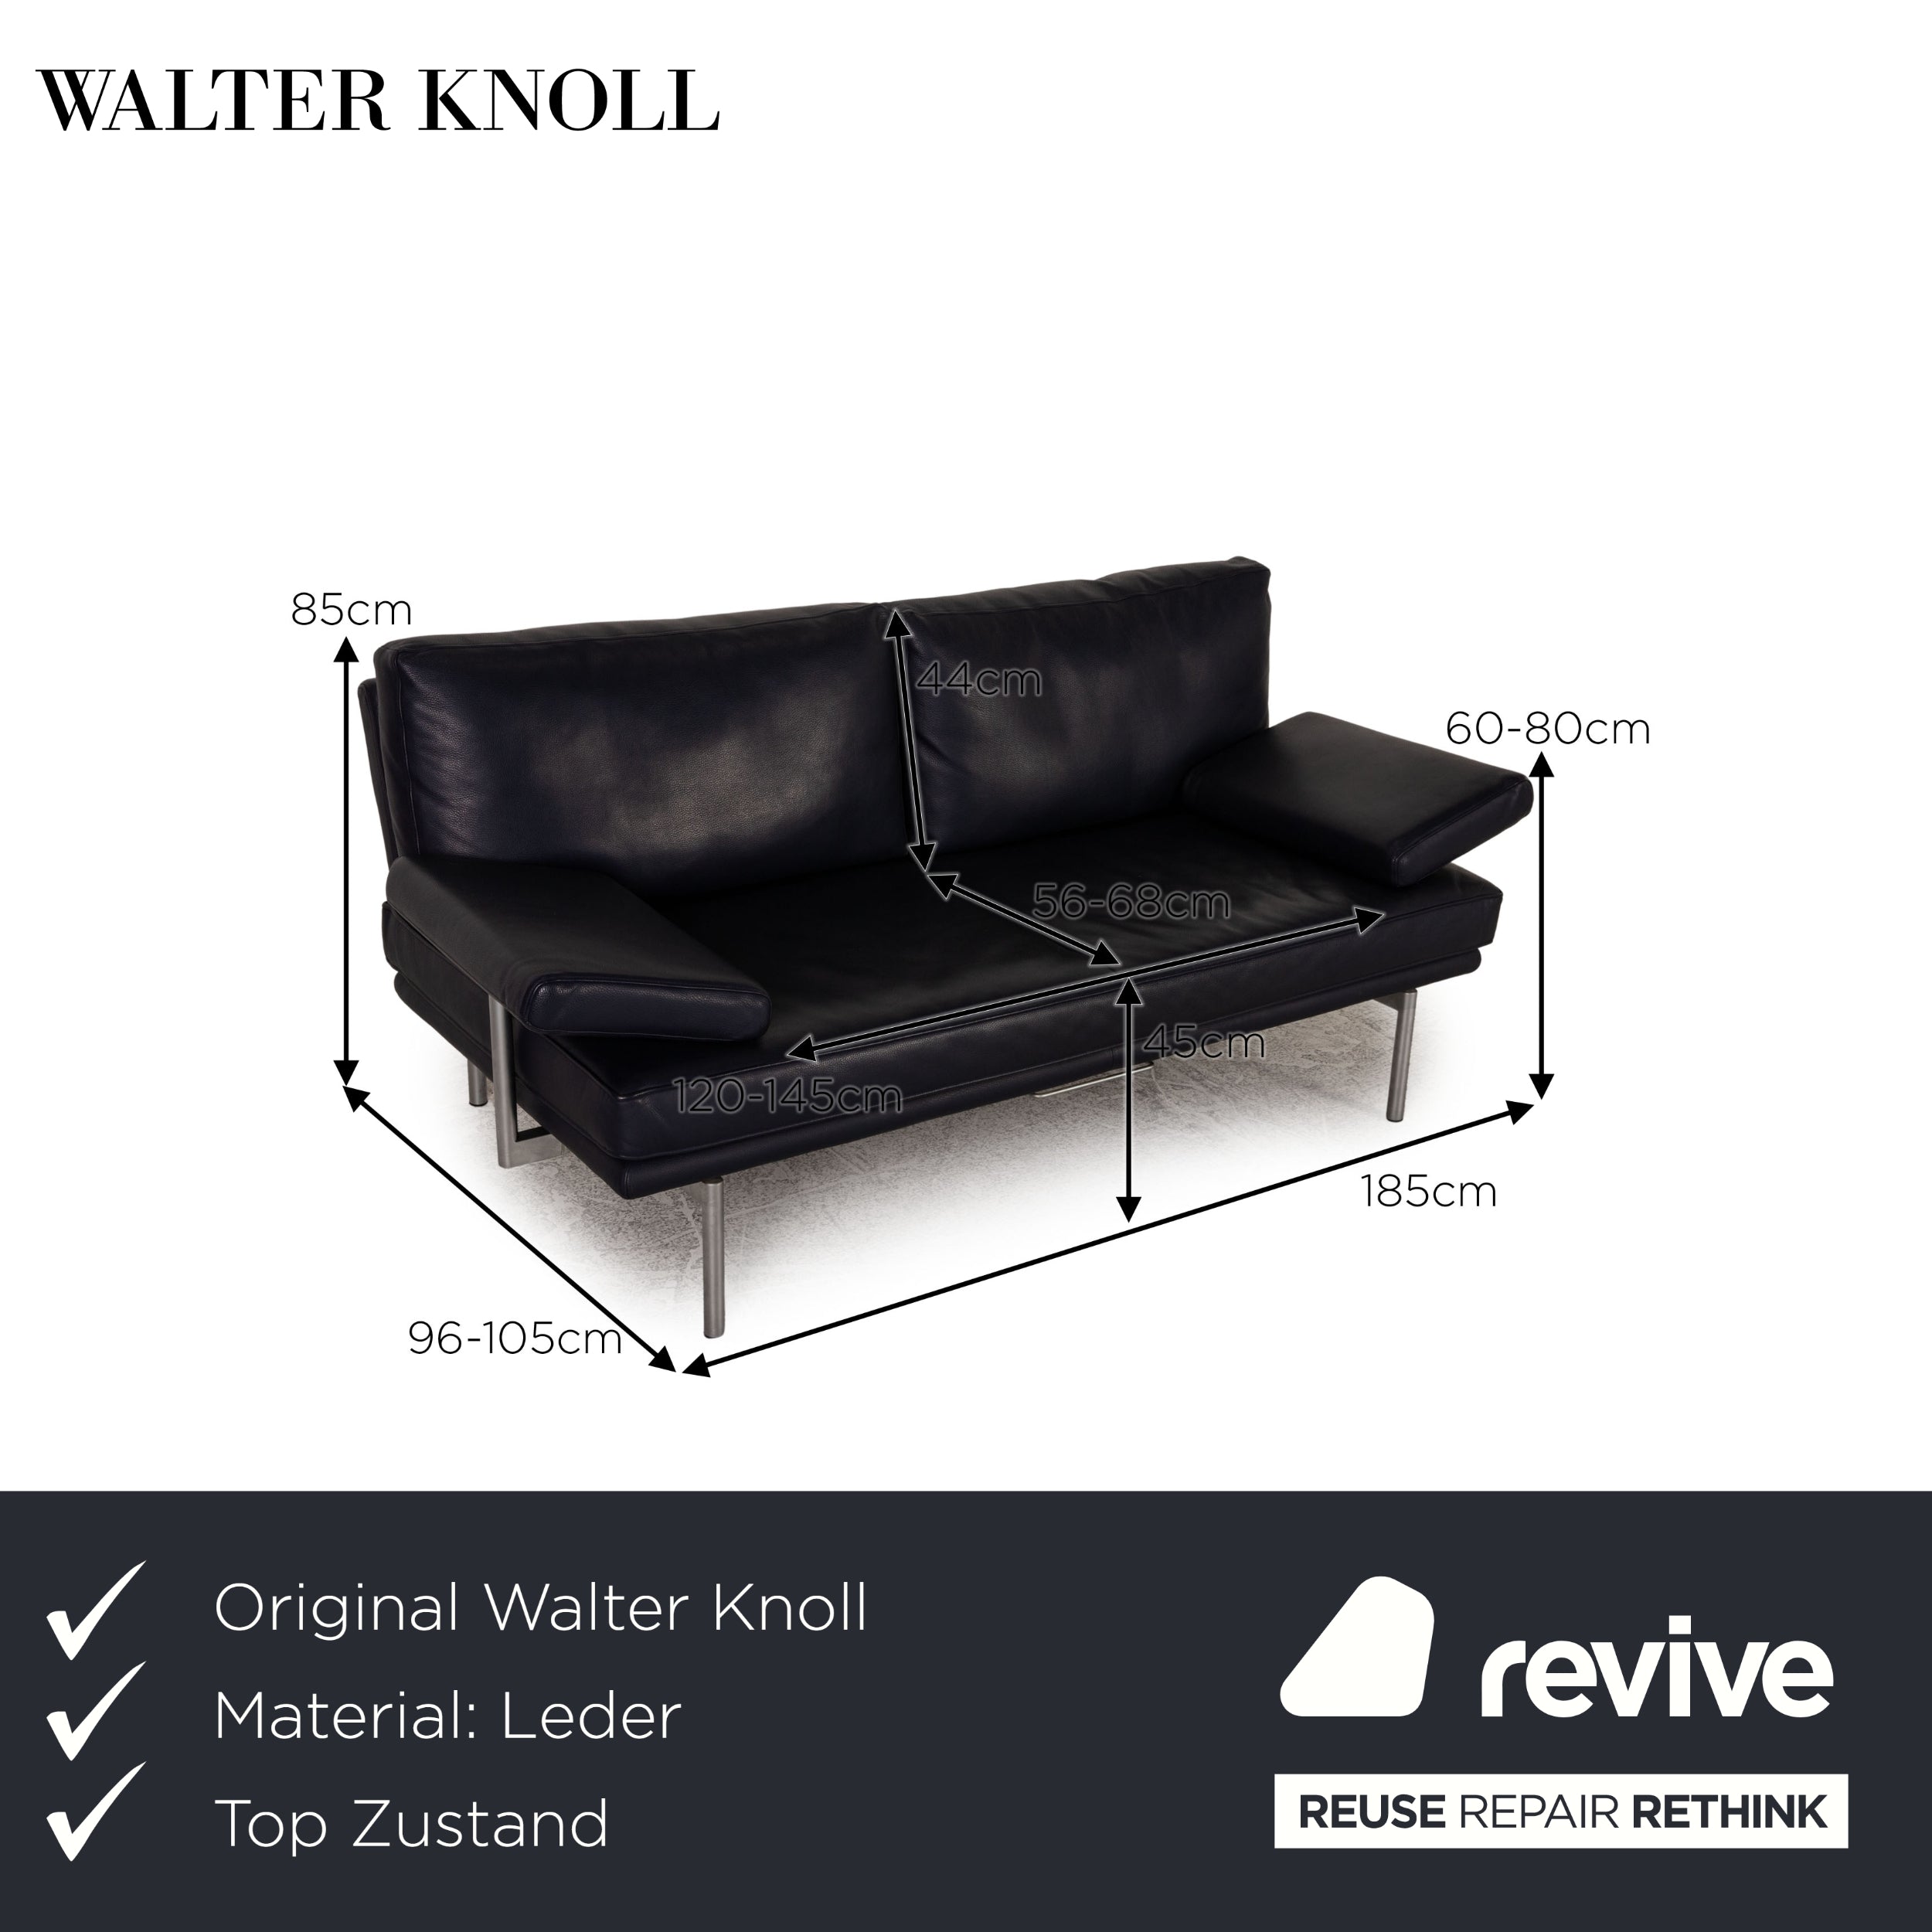 Walter Knoll Living Platform leather two-seater blue dark blue sofa couch function